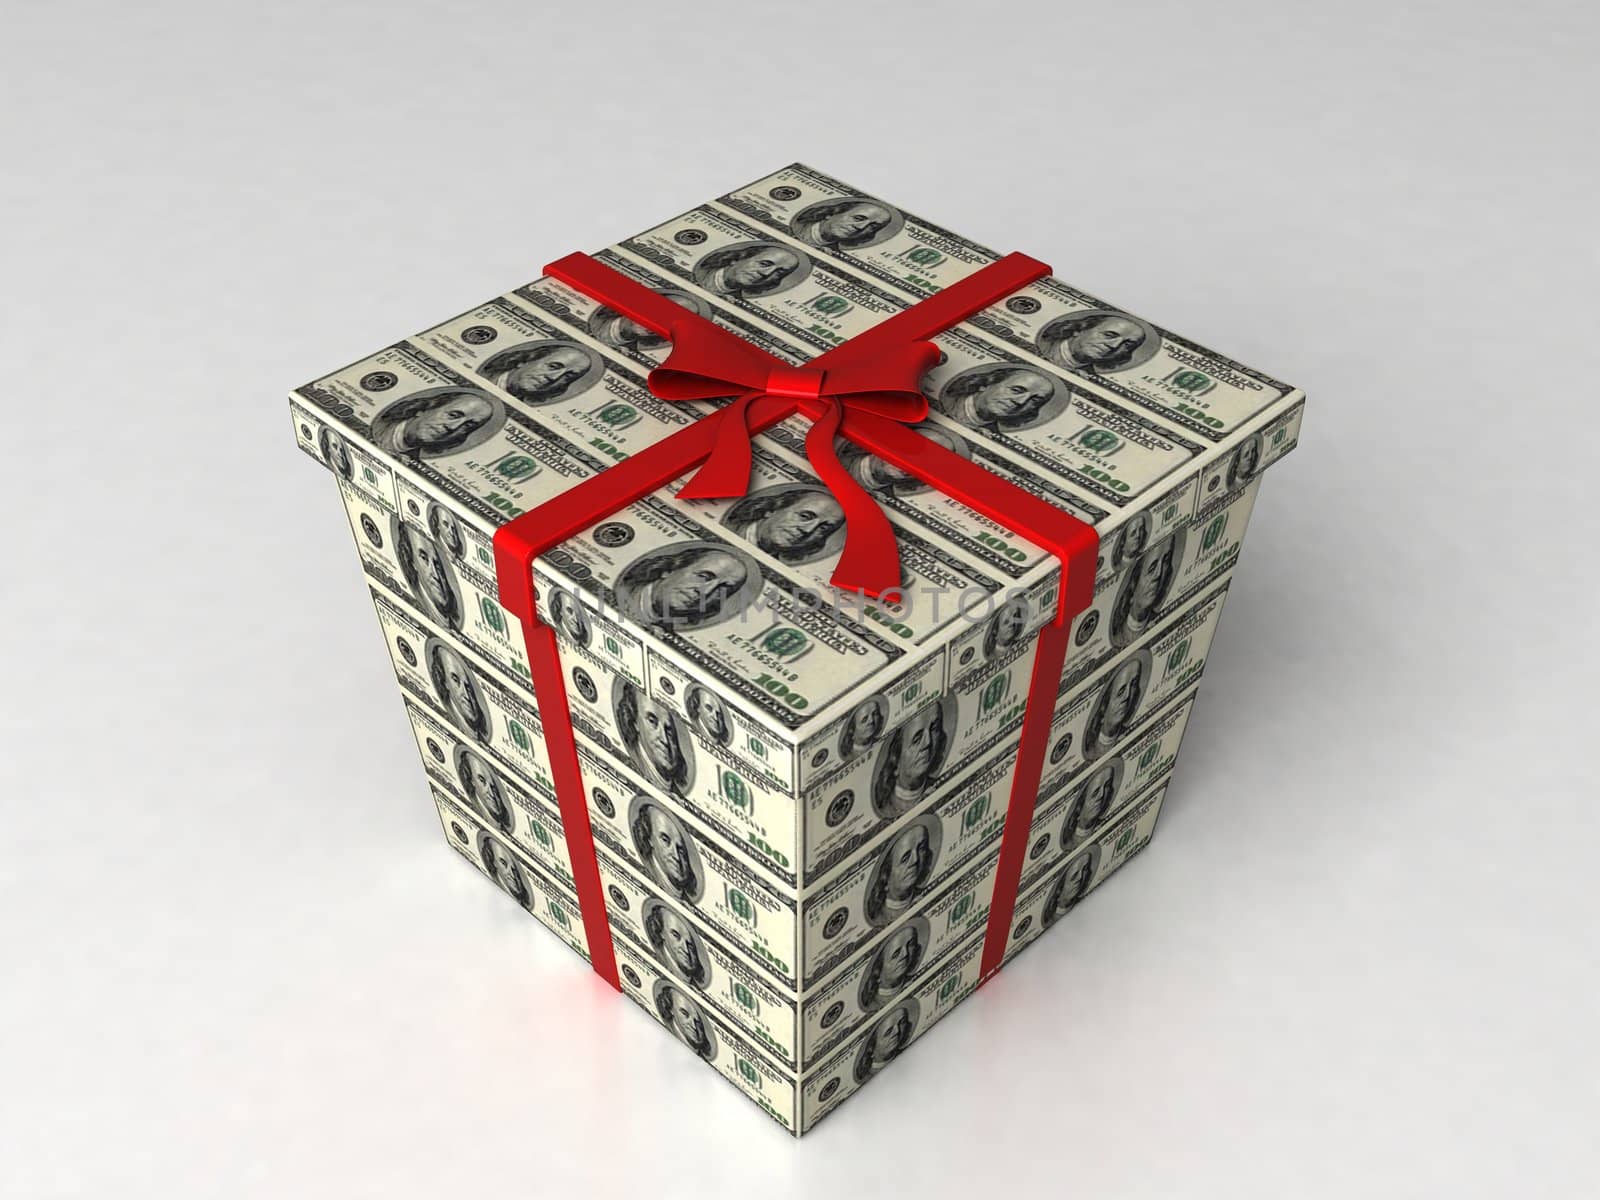 three dimensional gift box wrapped with 100 dollar bills by imagerymajestic